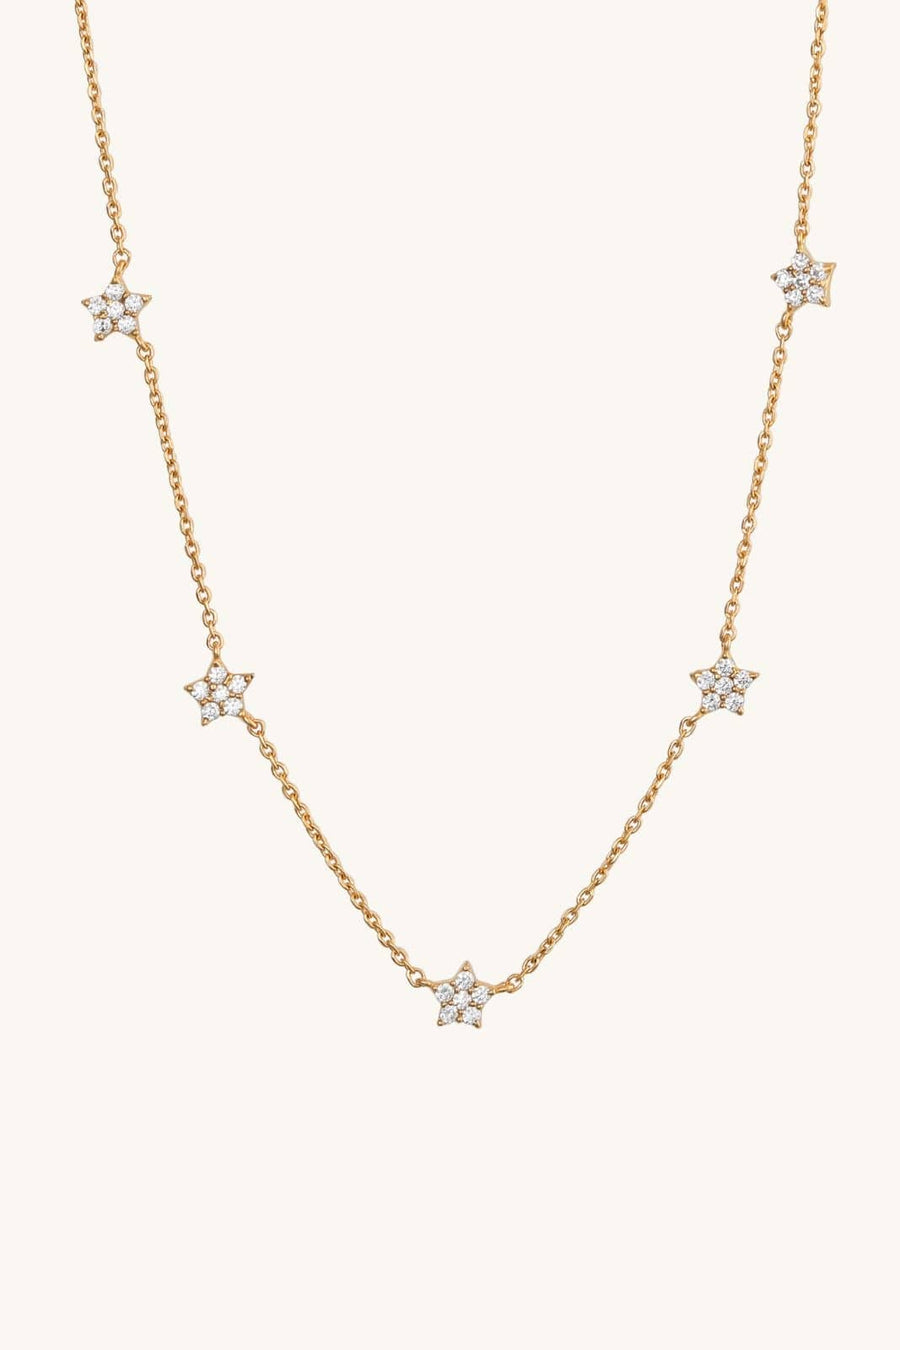 pave, star necklace, jewelry, fashion, style, accessories, glamour